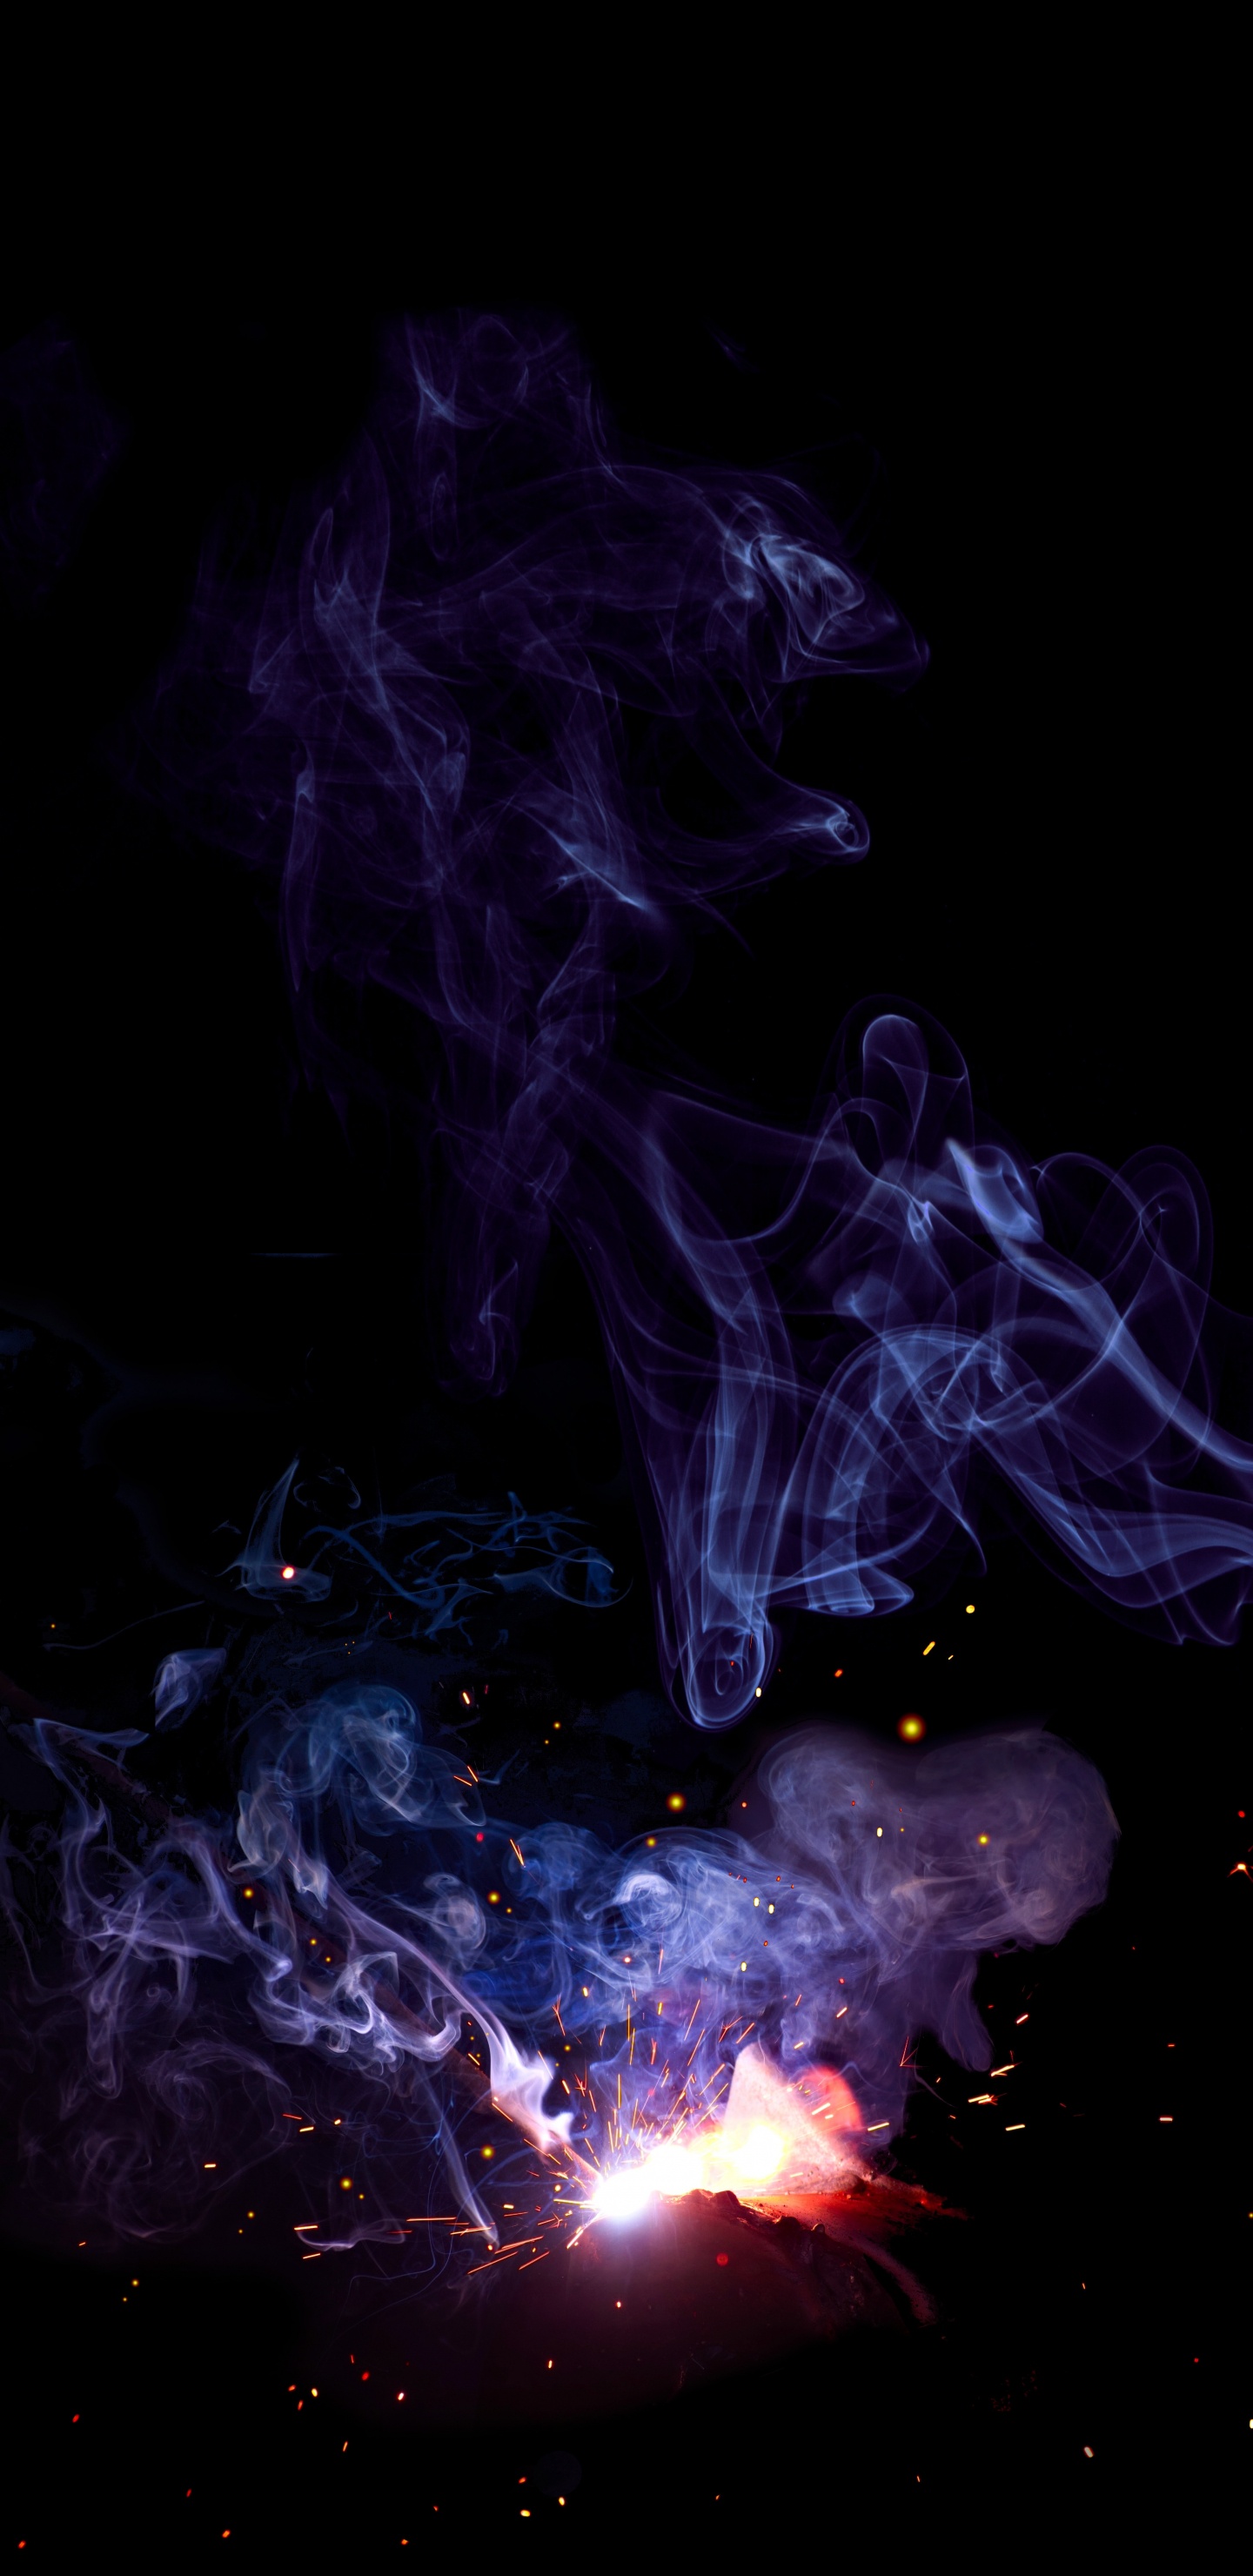 Blue and White Smoke Illustration. Wallpaper in 1440x2960 Resolution